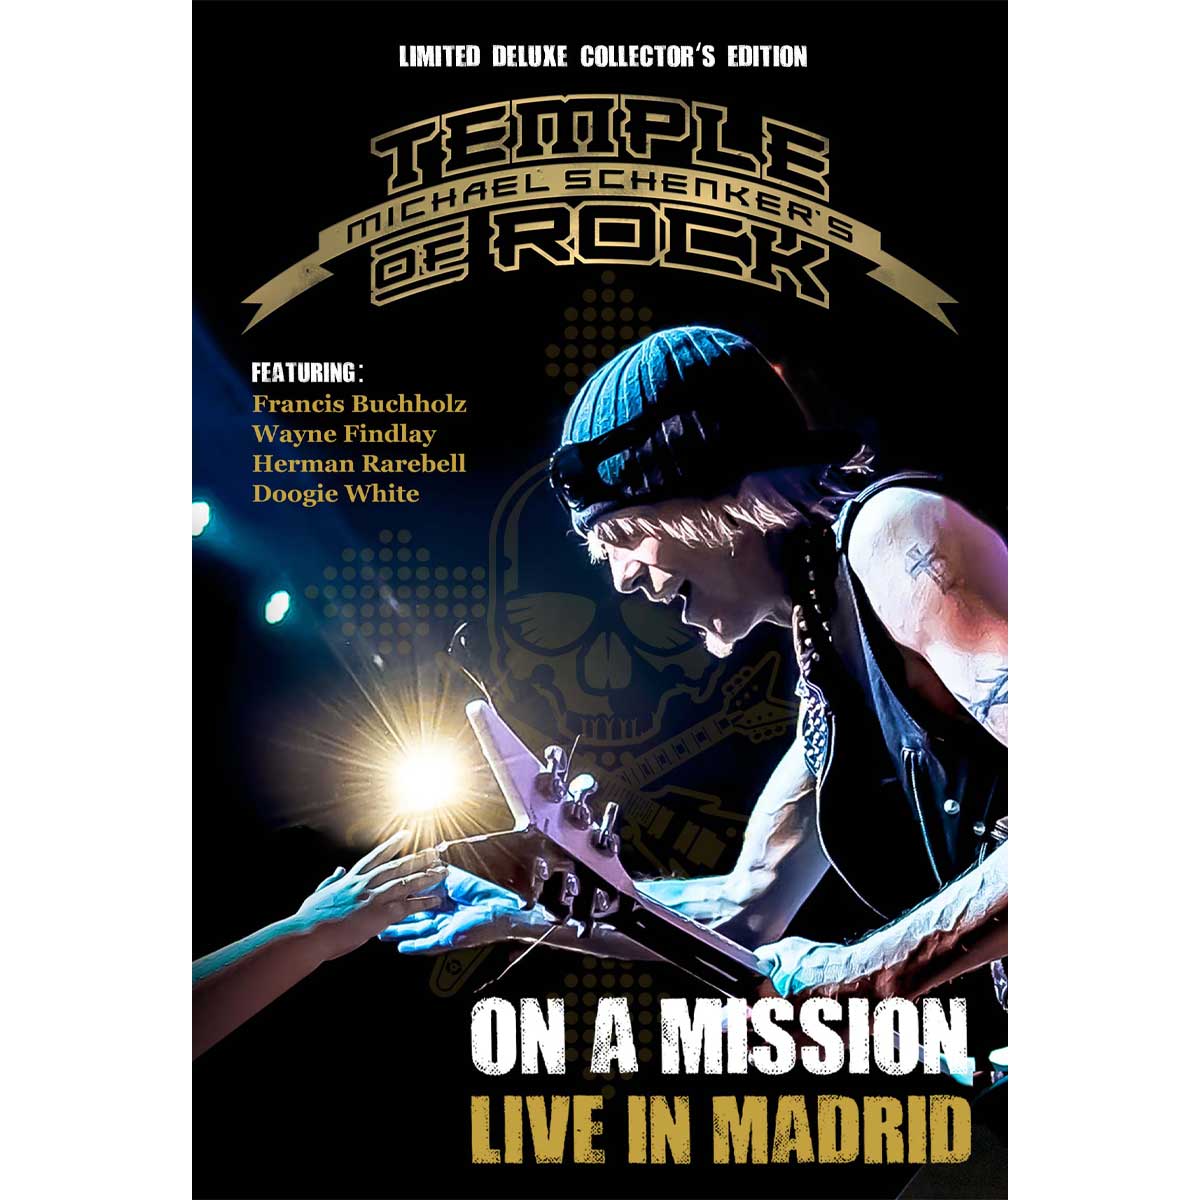 On A Mission - Live In Madrid (Ltd. Deluxe Edt.)